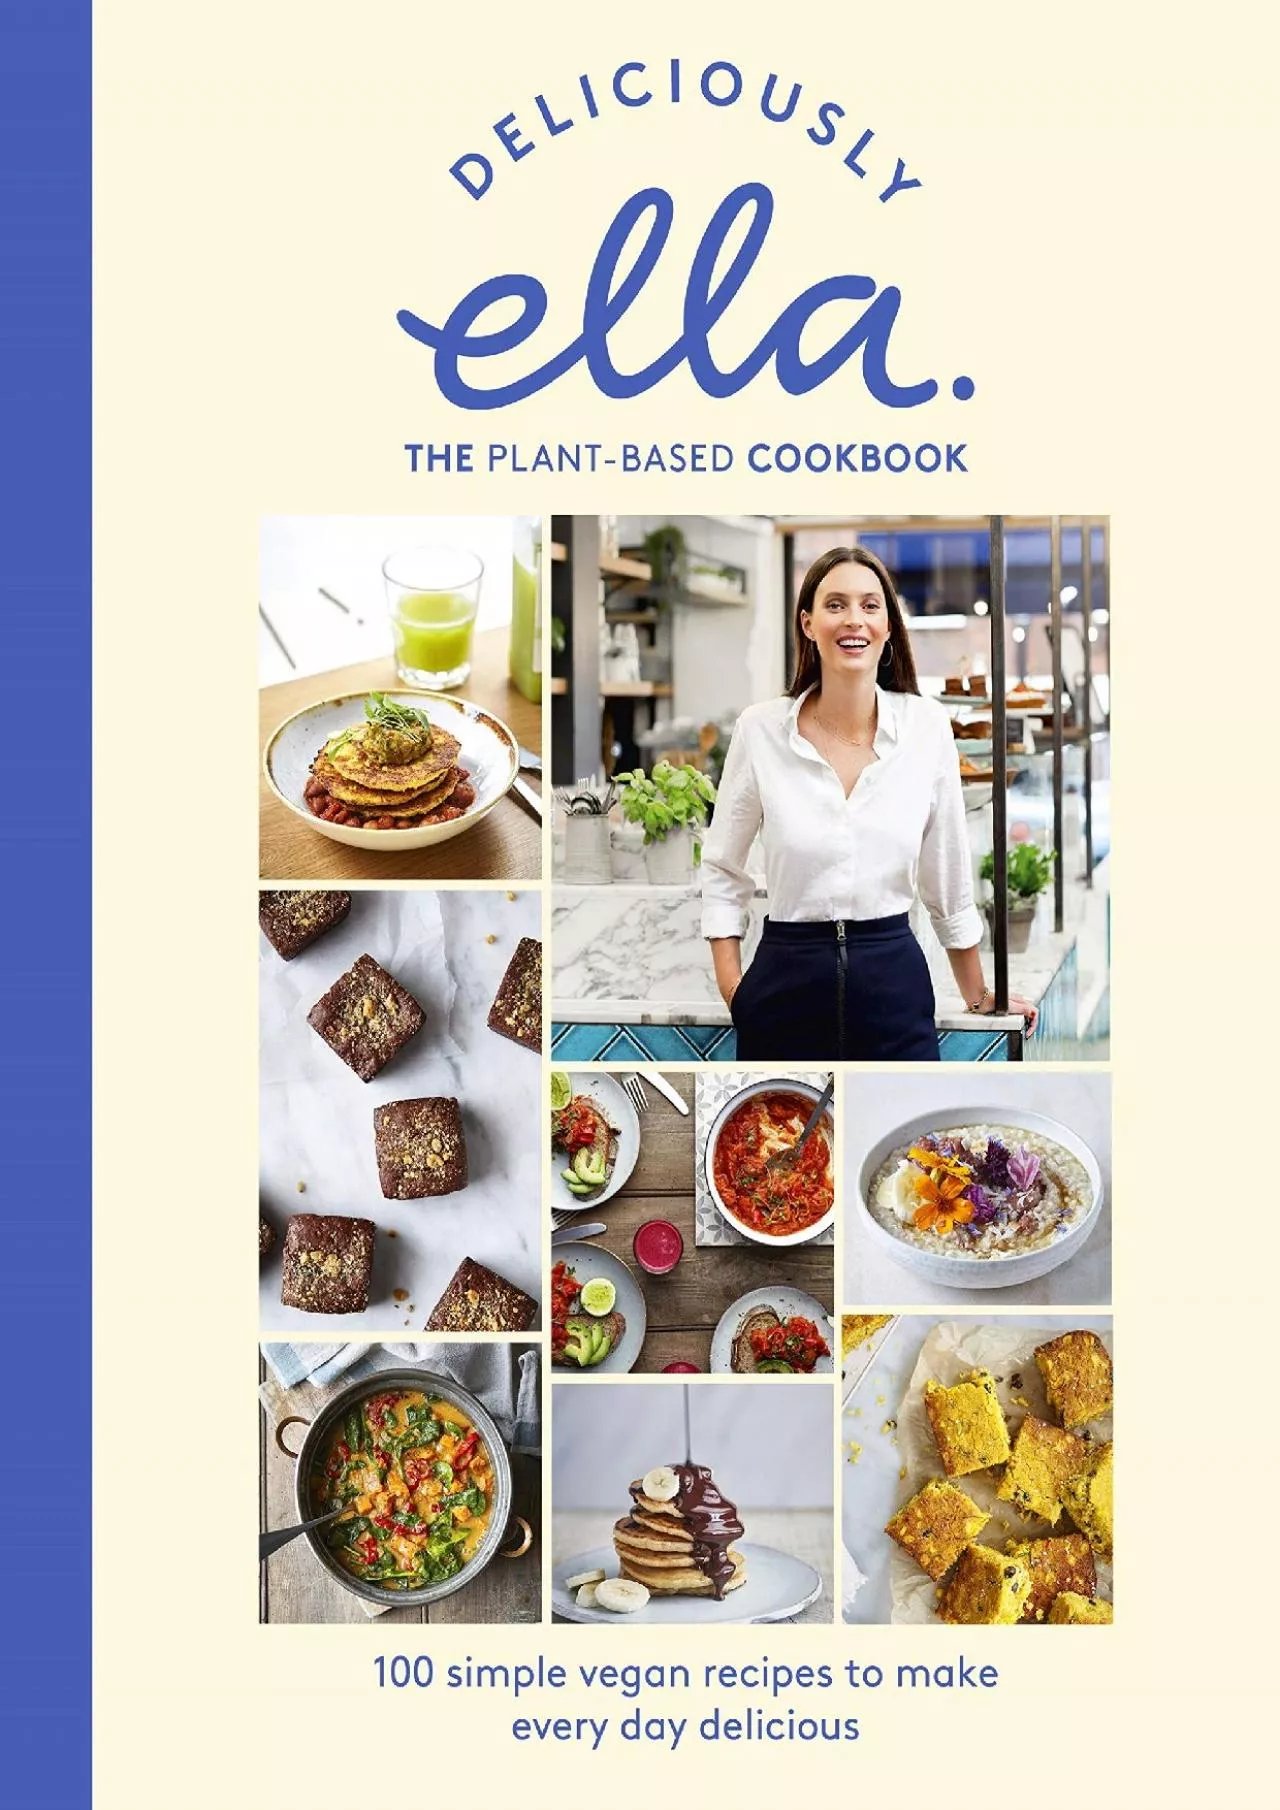 (READ)-Deliciously Ella The Plant-Based Cookbook: The fastest selling vegan cookbook of